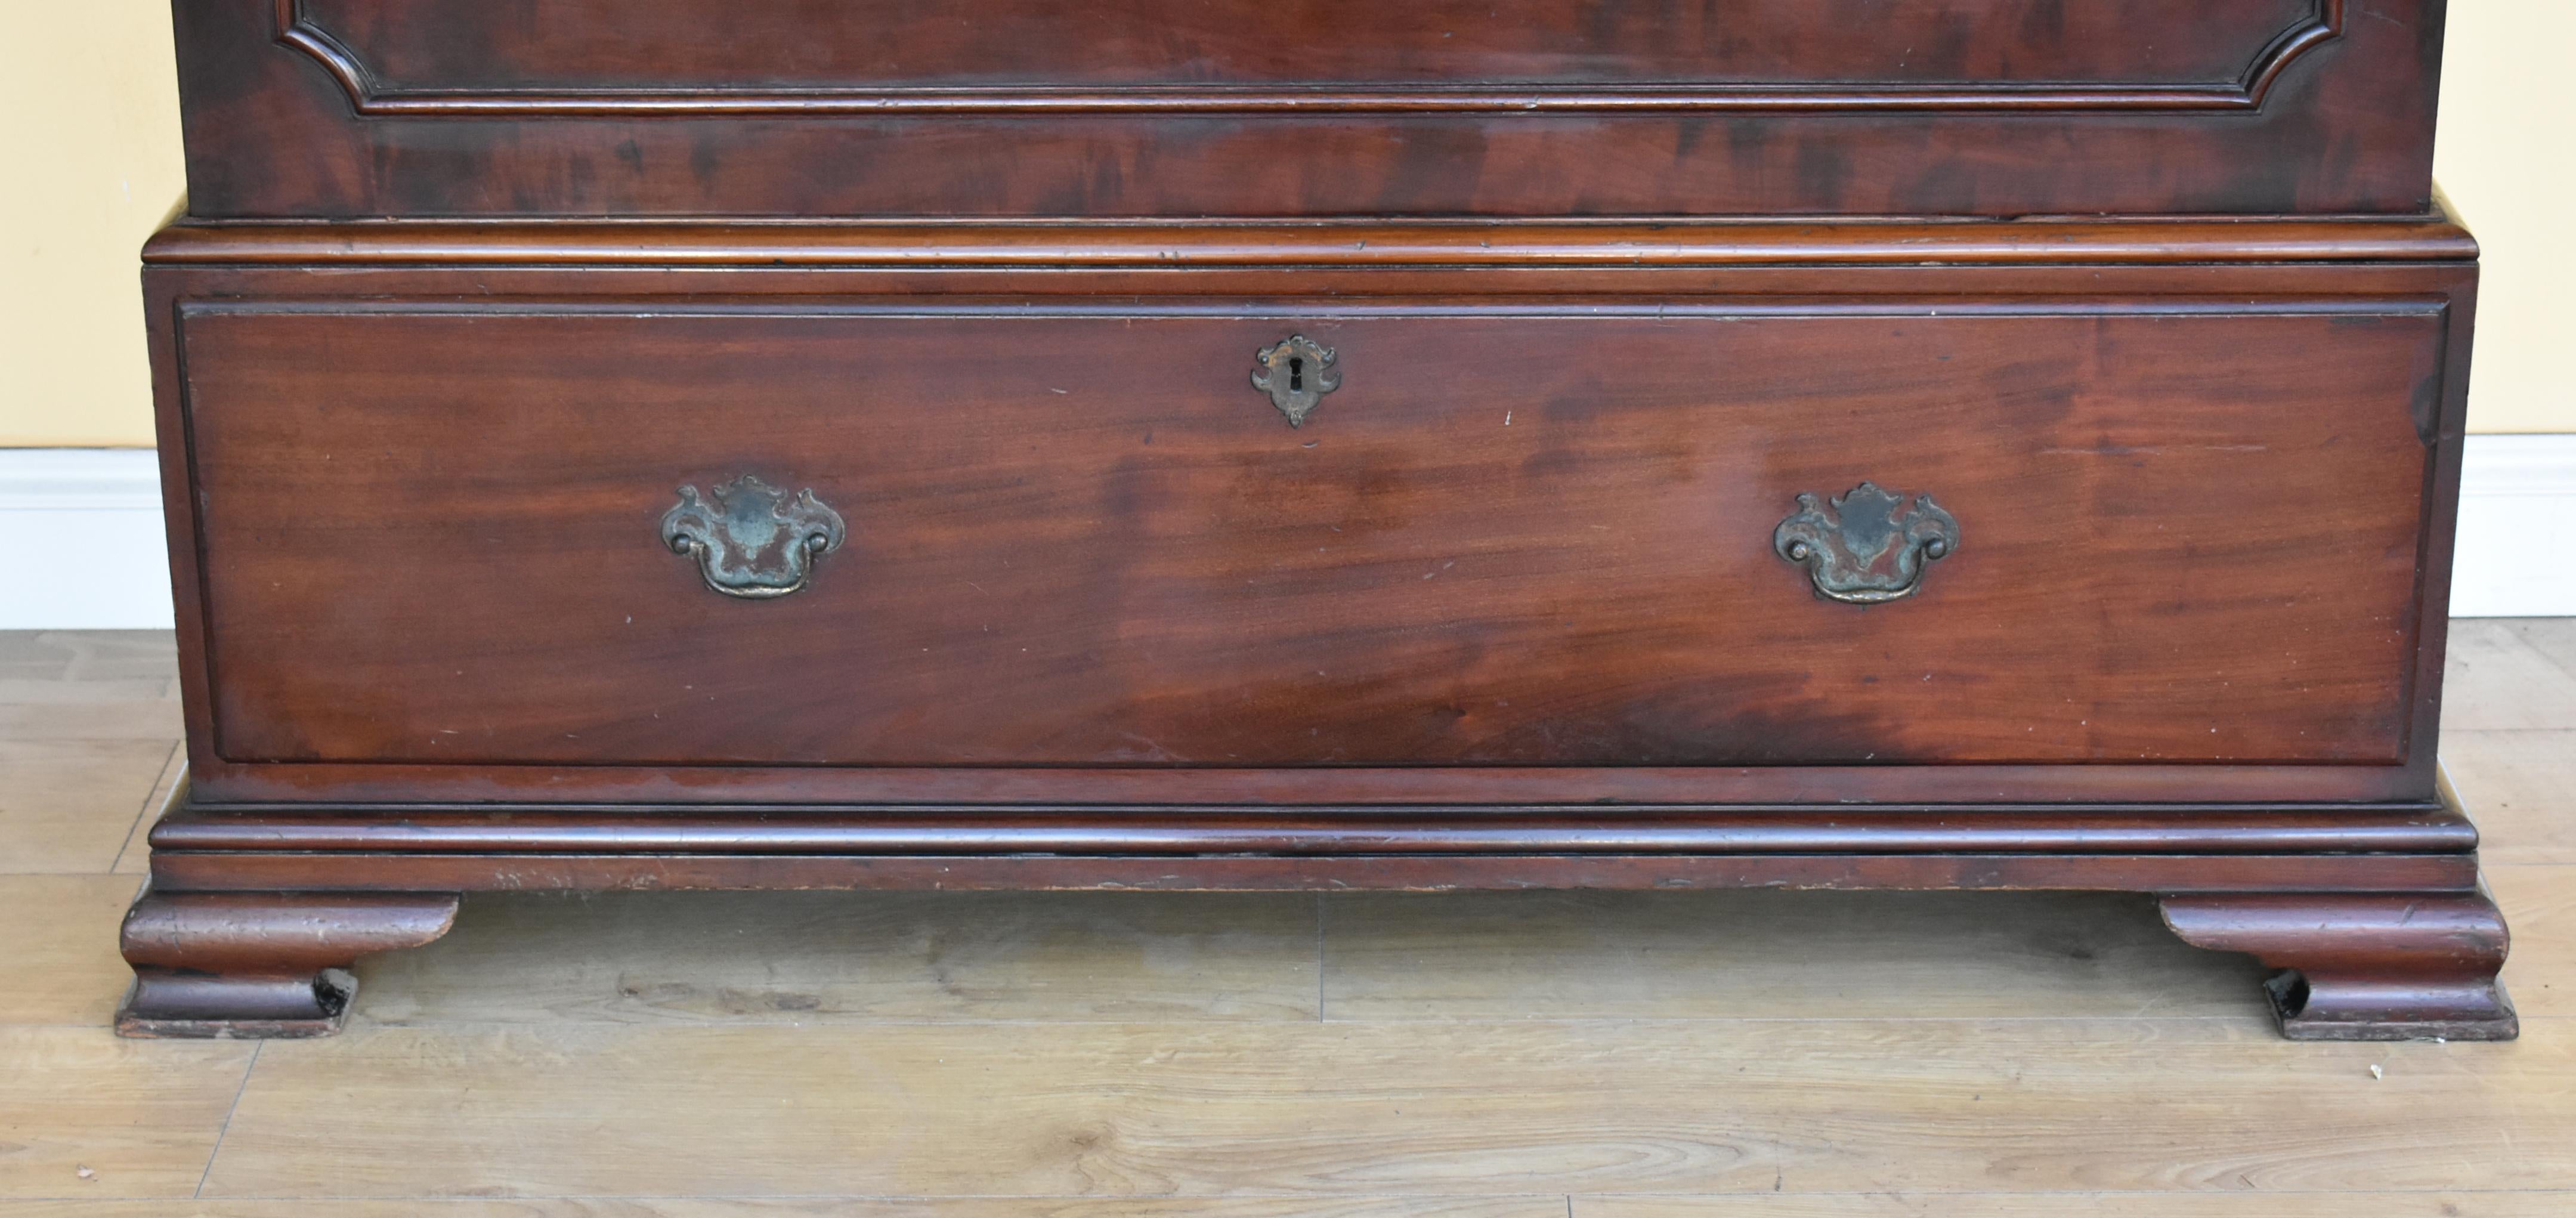 For sale is a good quality George III mahogany silver chest made by T. Wilson, great queen street of London. The top of the chest has a lift up lid which opens to reveal ample storage space within. The chest has a single drawer in the base and two